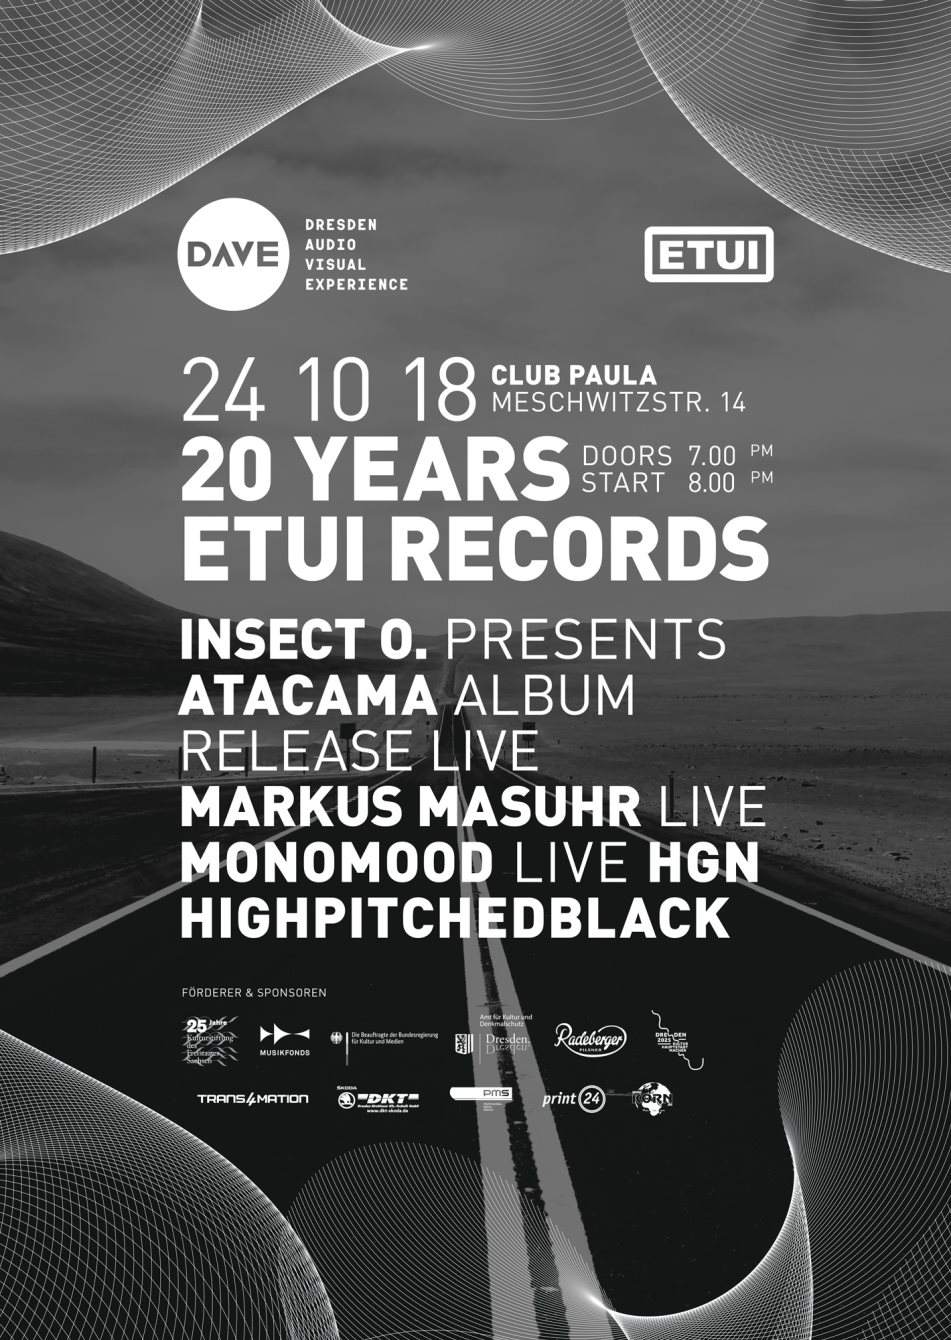 DAVE Festival 2018 - 20 Years Etui Records - フライヤー表